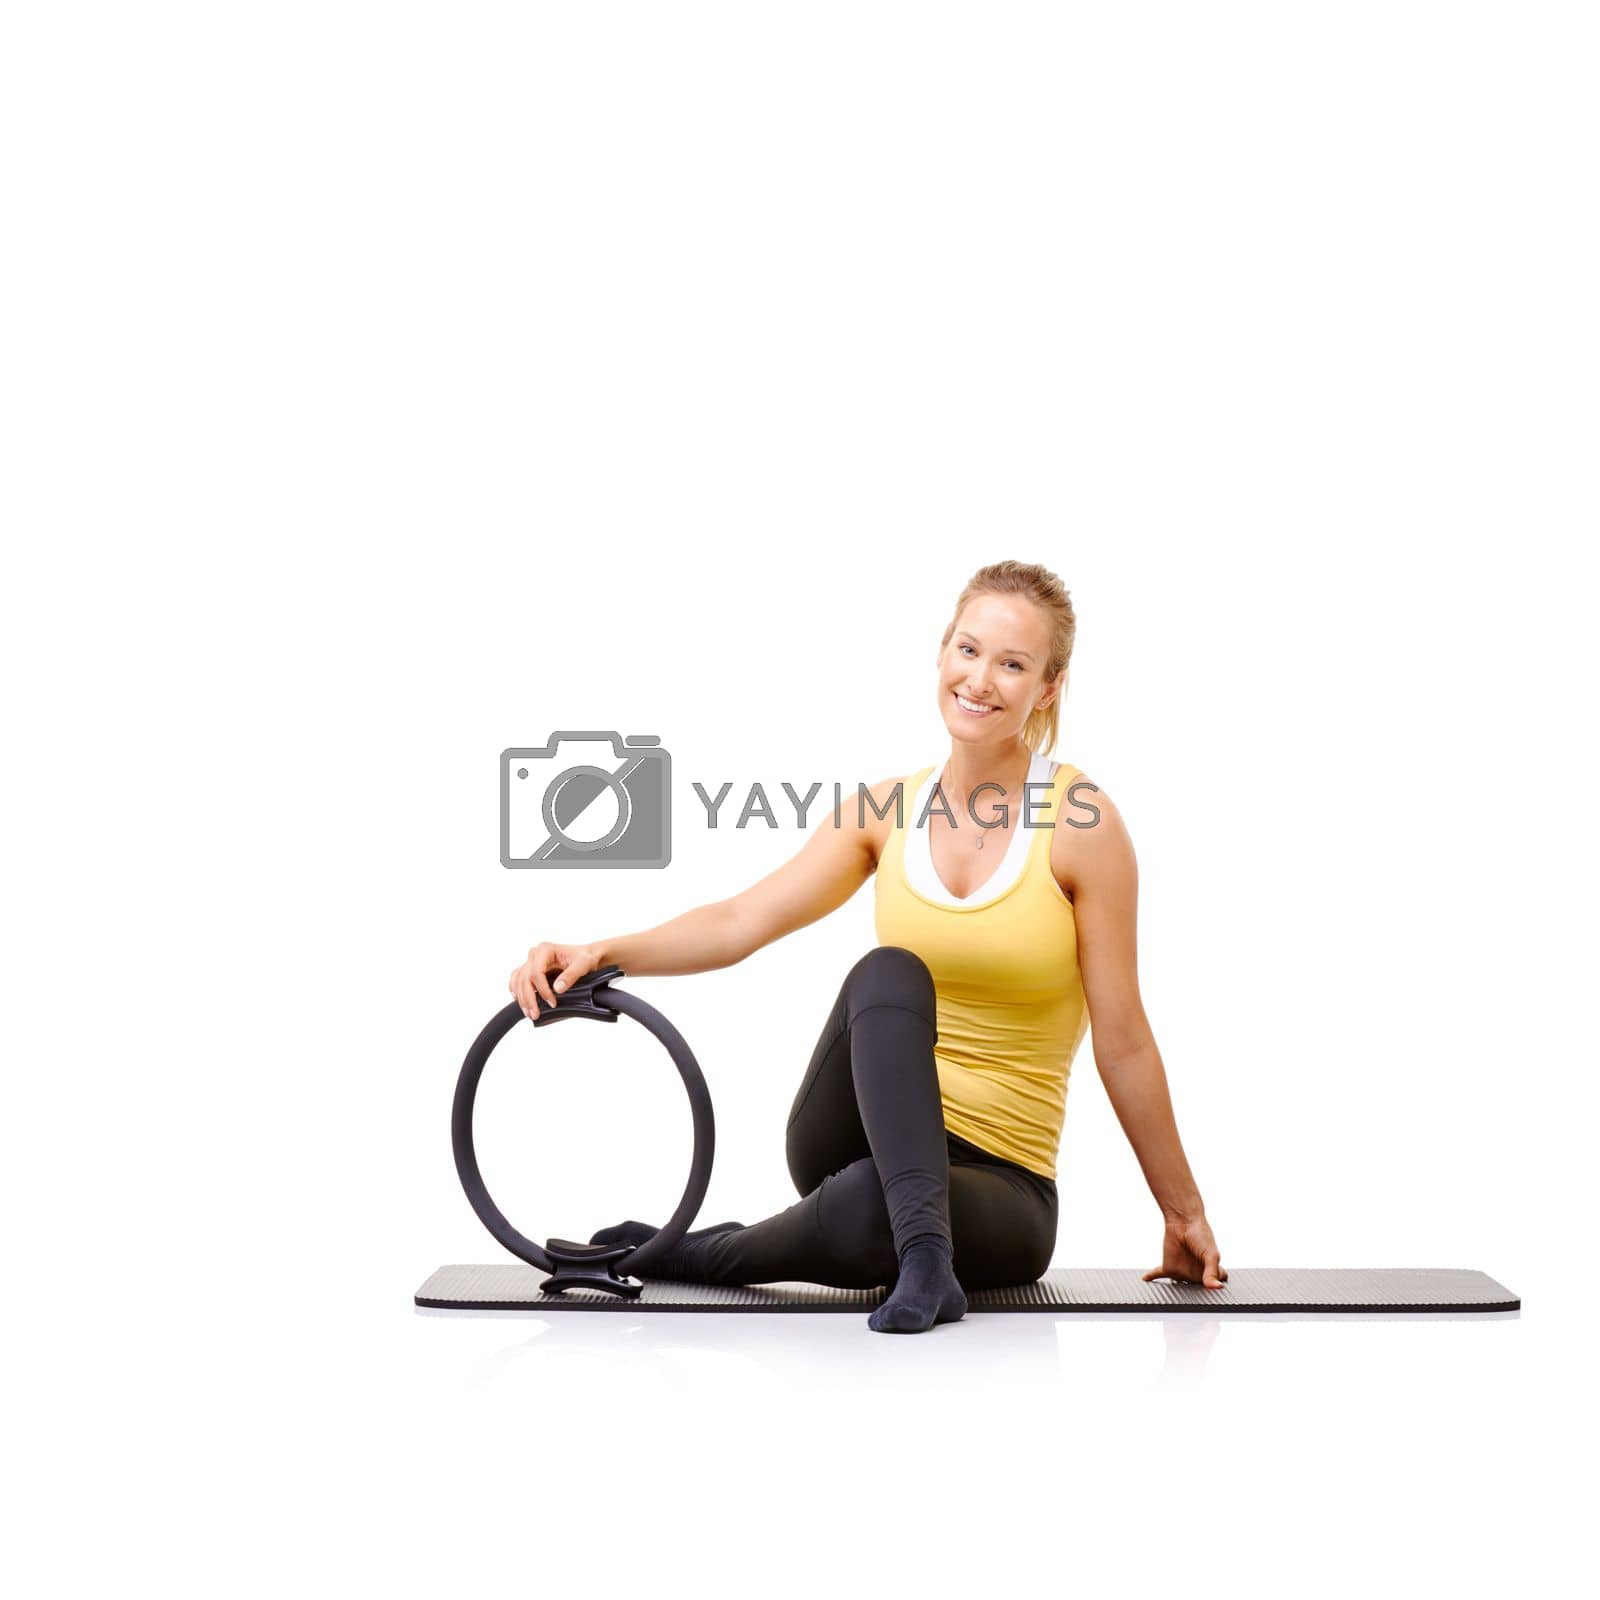 Royalty free image of She loves using her pilates ring. A beautiful young woman sitting on her exercise mat holding a pilates ring. by YuriArcurs